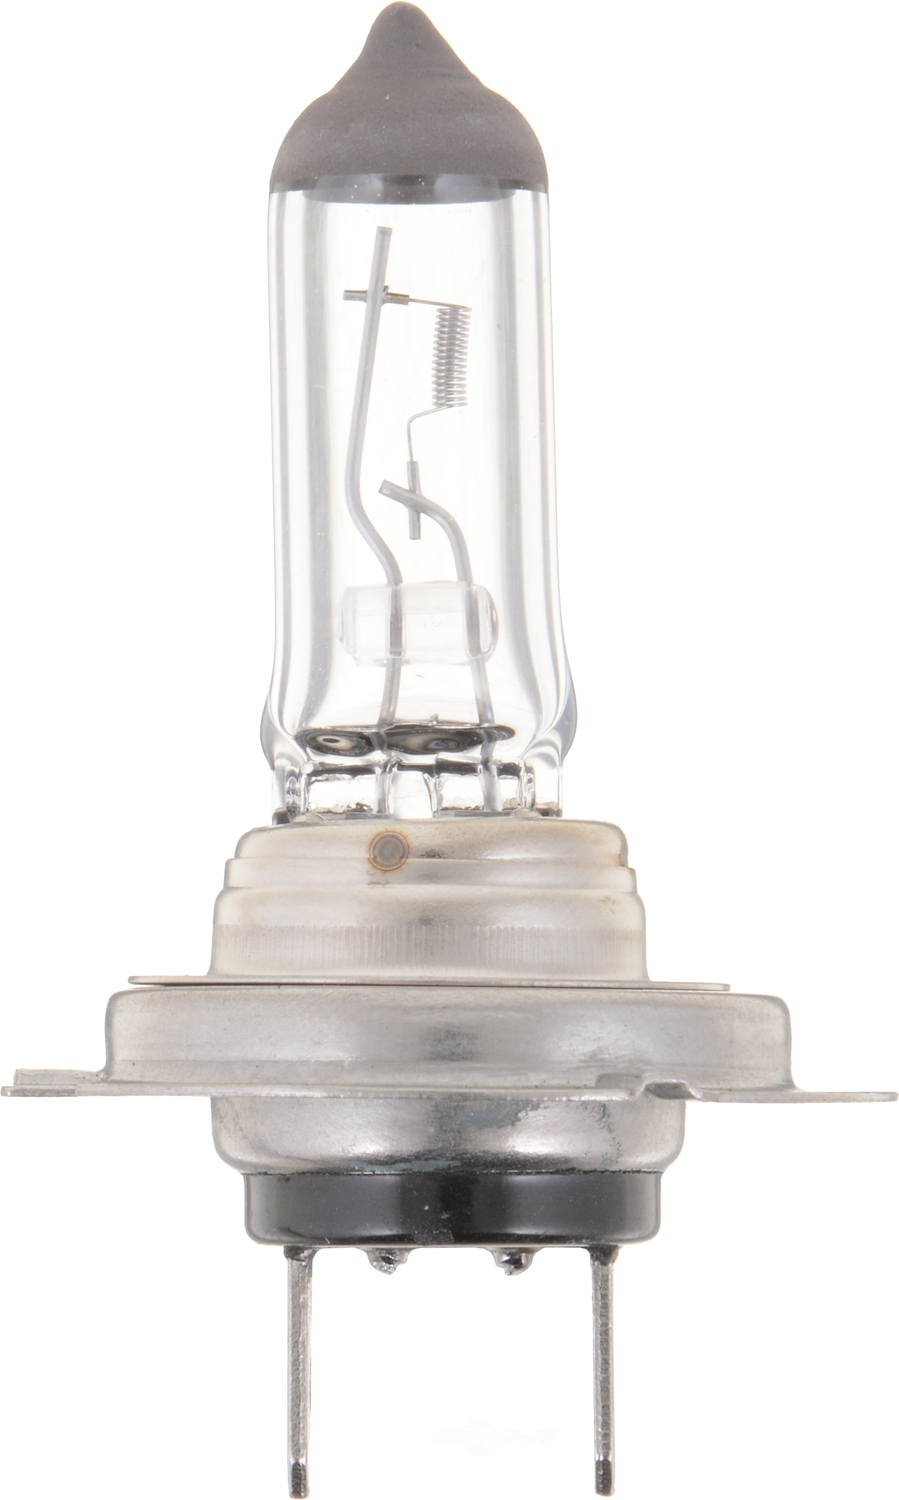 PHILIPS LIGHTING COMPANY - Standard - Single Commercial Pack Parking Light Bulb (Front) - PLP H7C1